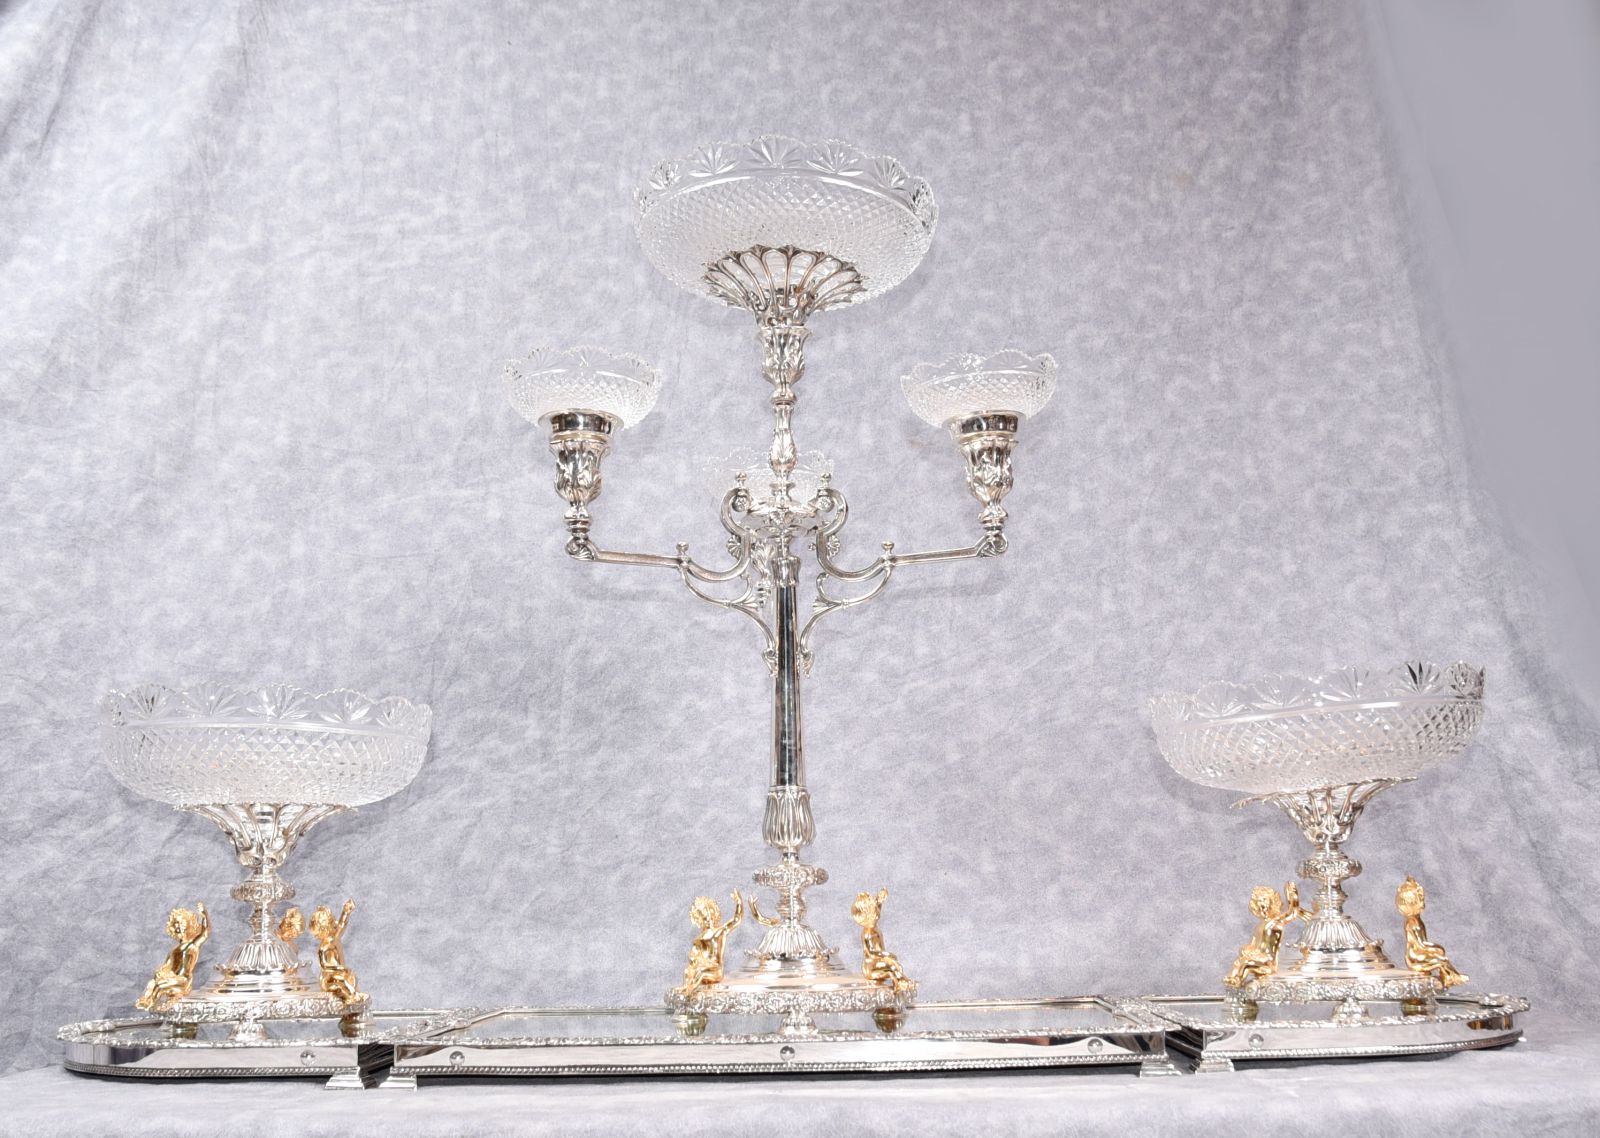 Some of these centrepieces can be adapted to house a silver plate candelabra to the centre